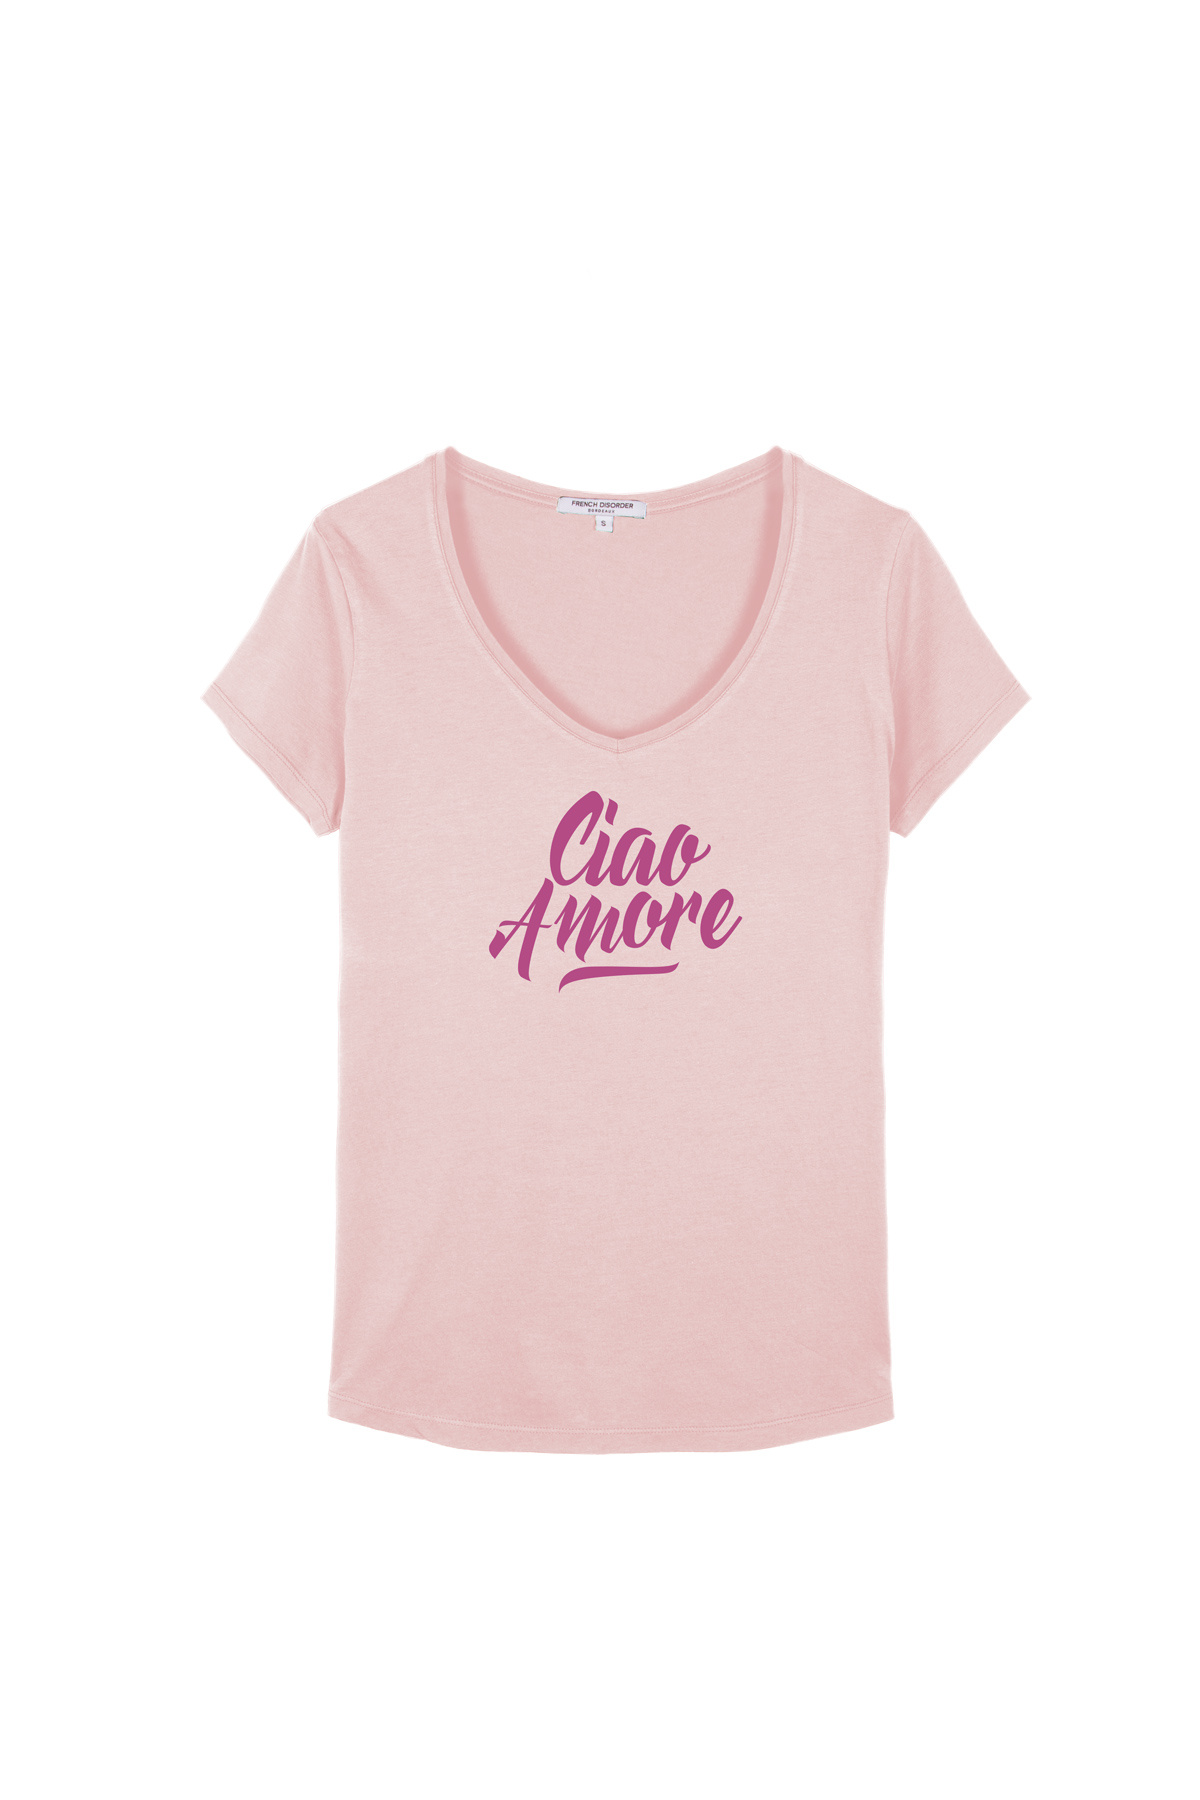 T-shirt CIAO AMORE